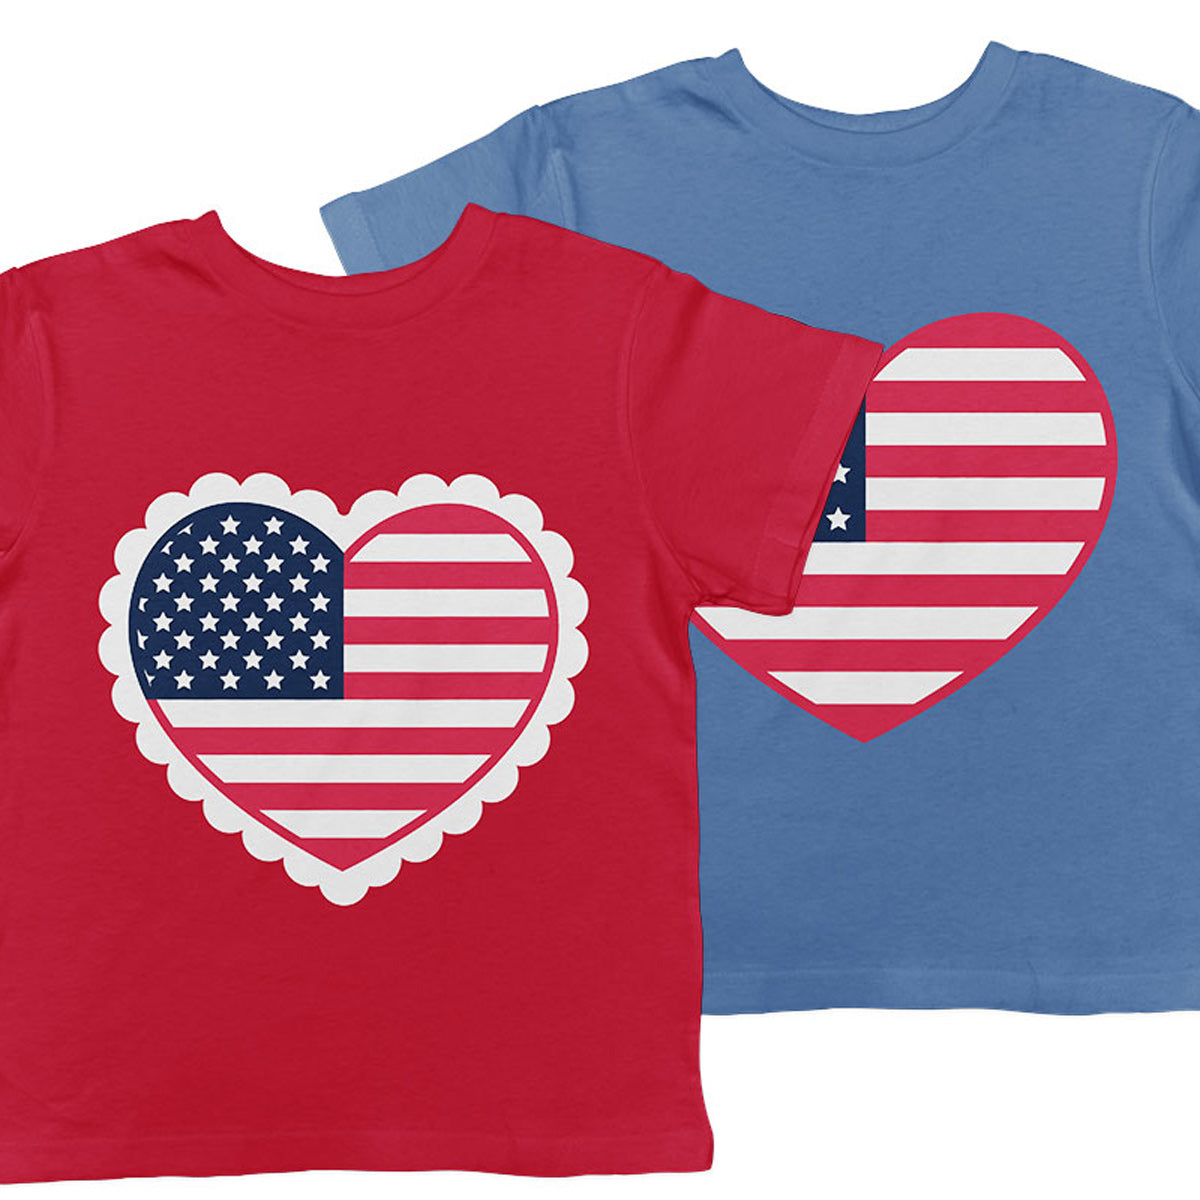 American Flag Heart svg files in plain border or scallop border - Free for Commercial Use